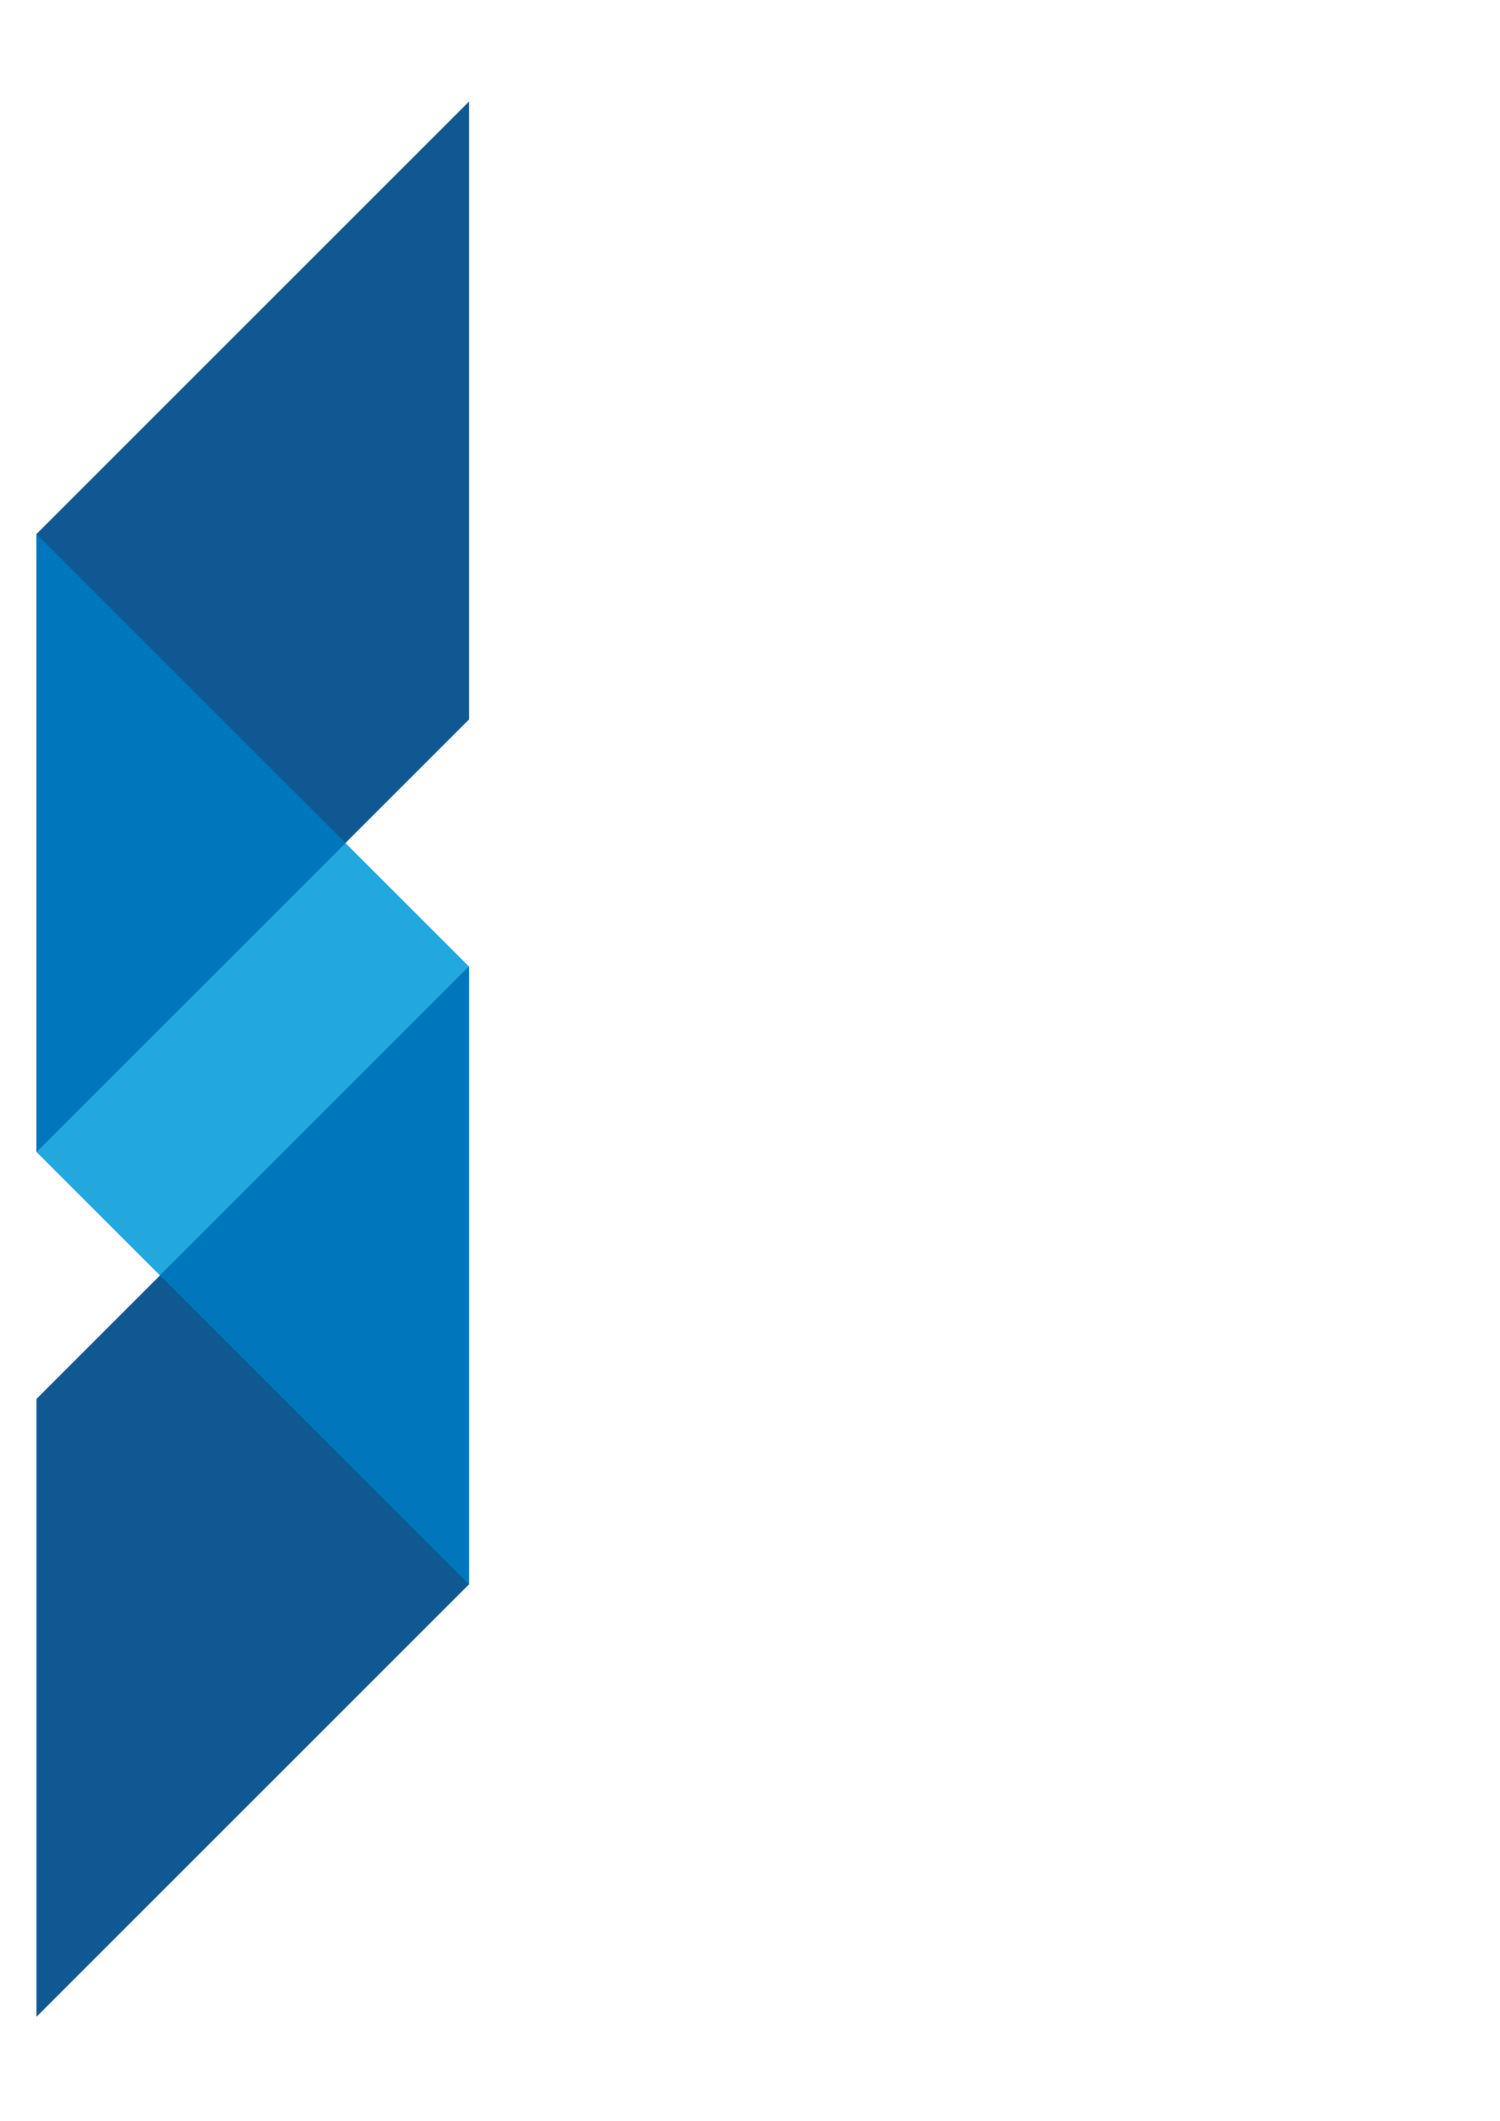 Sanderson Cleaning Services